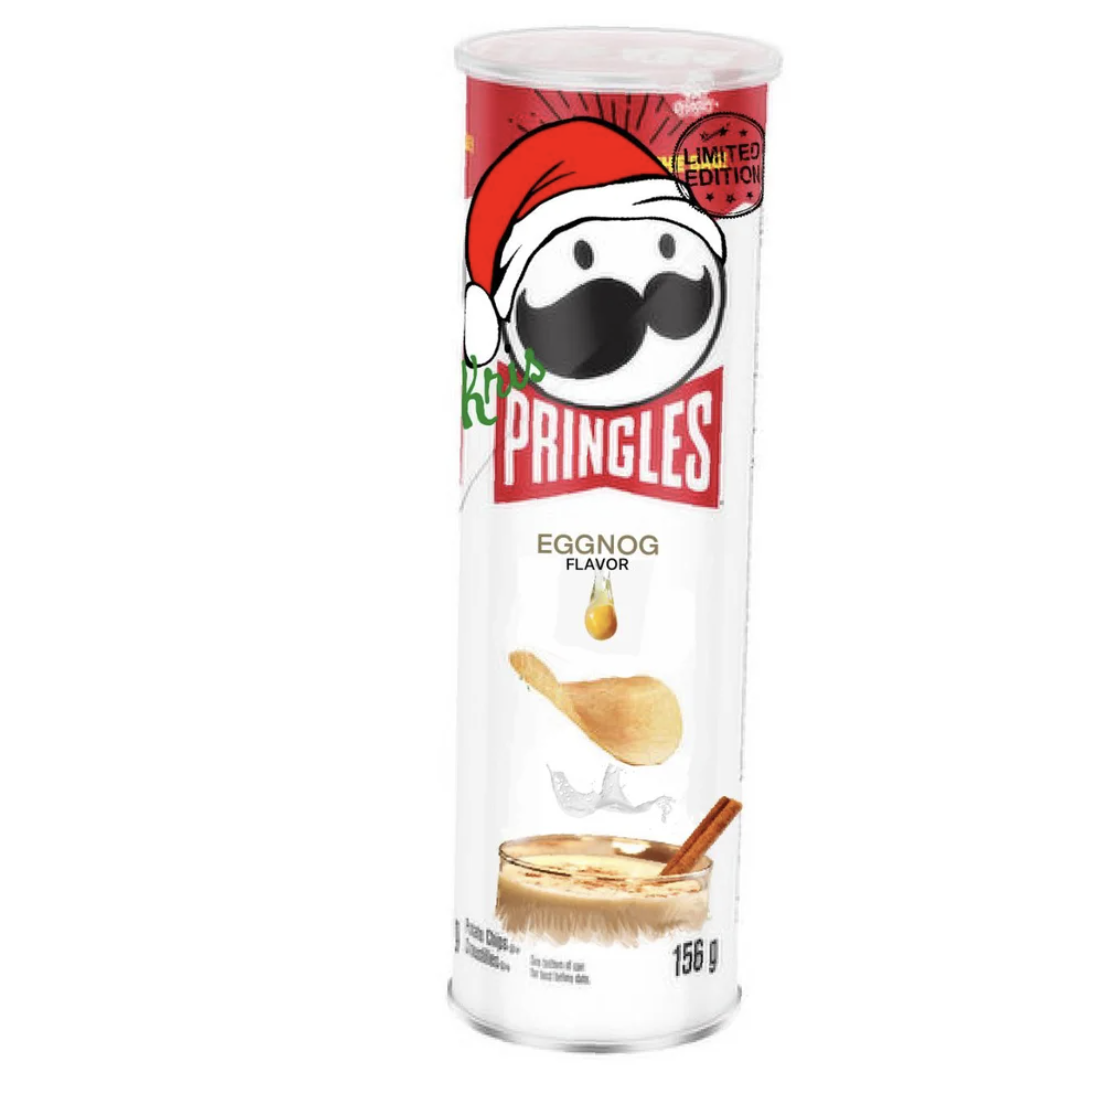 Pringles Eggnog Flavor tube can with the Pringles logo wearing a Santa hat